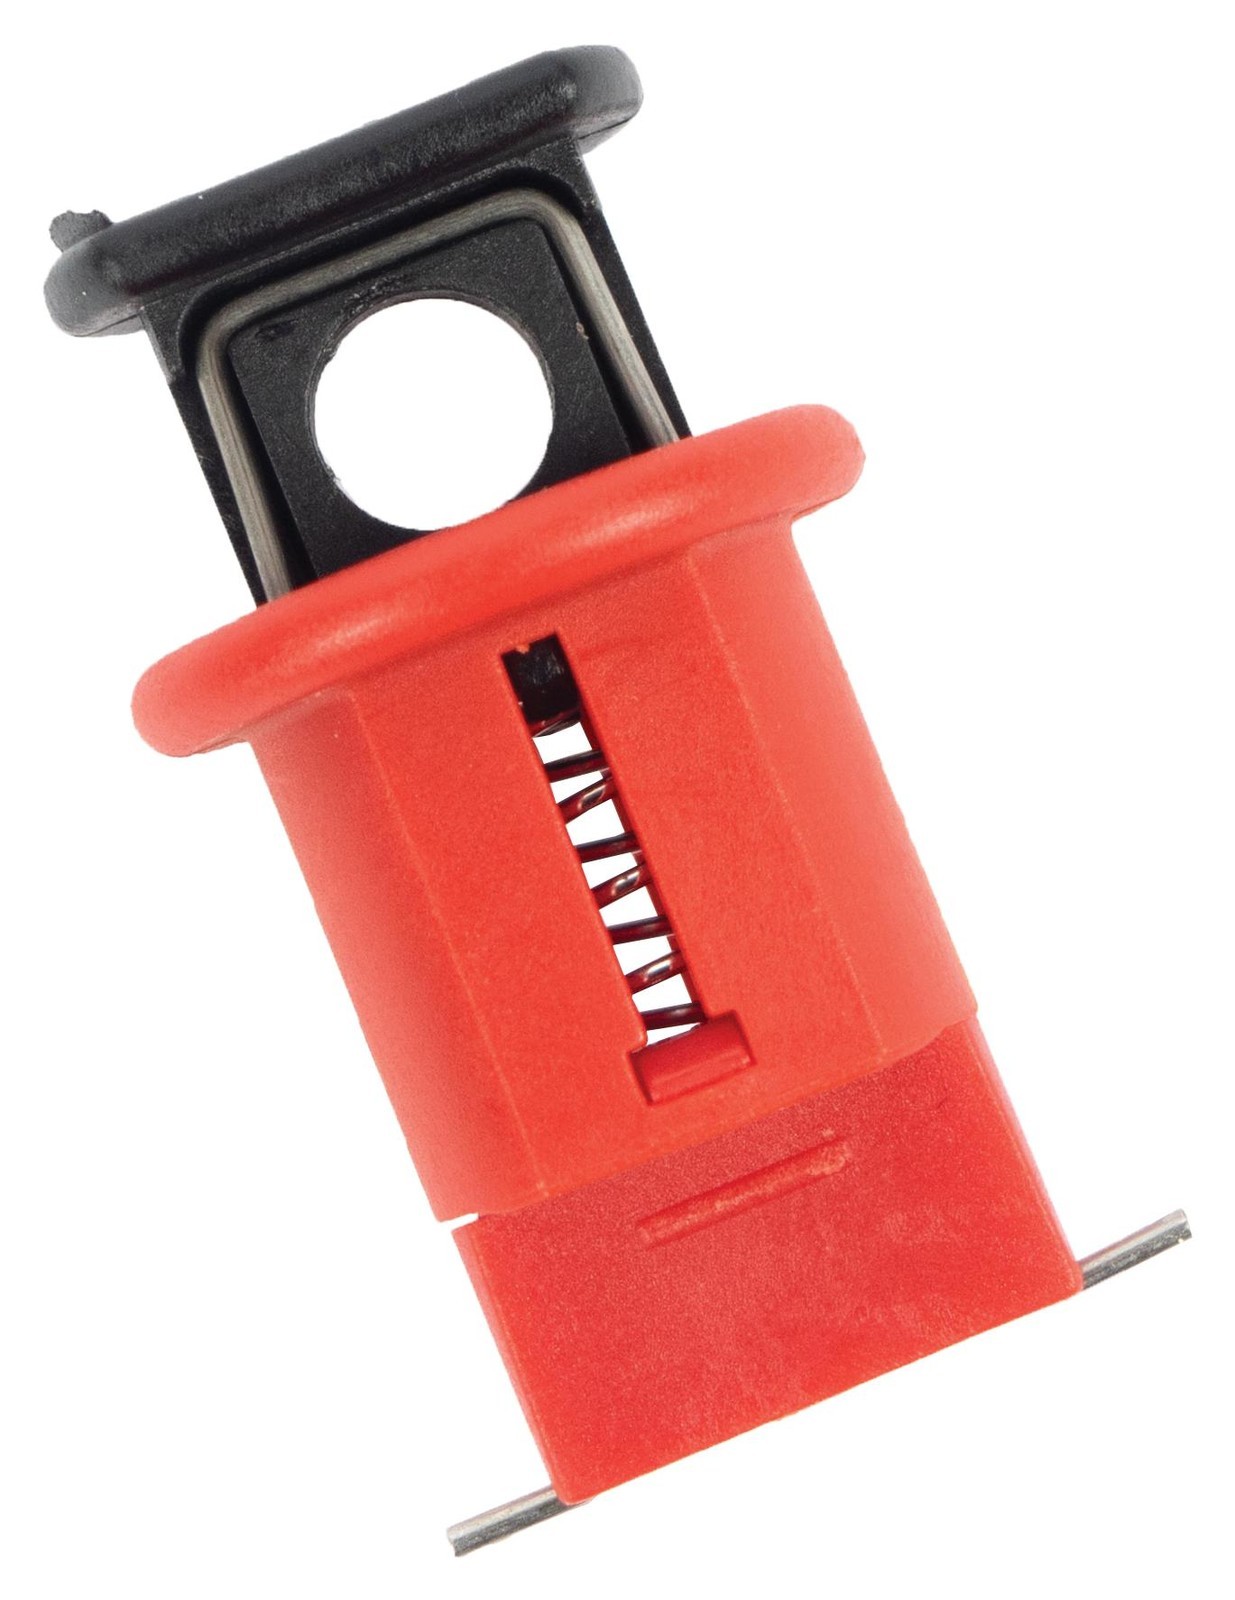 Ck Tools K81200 Pin Out Wide Lockout, Ckt Breaker, 6mm